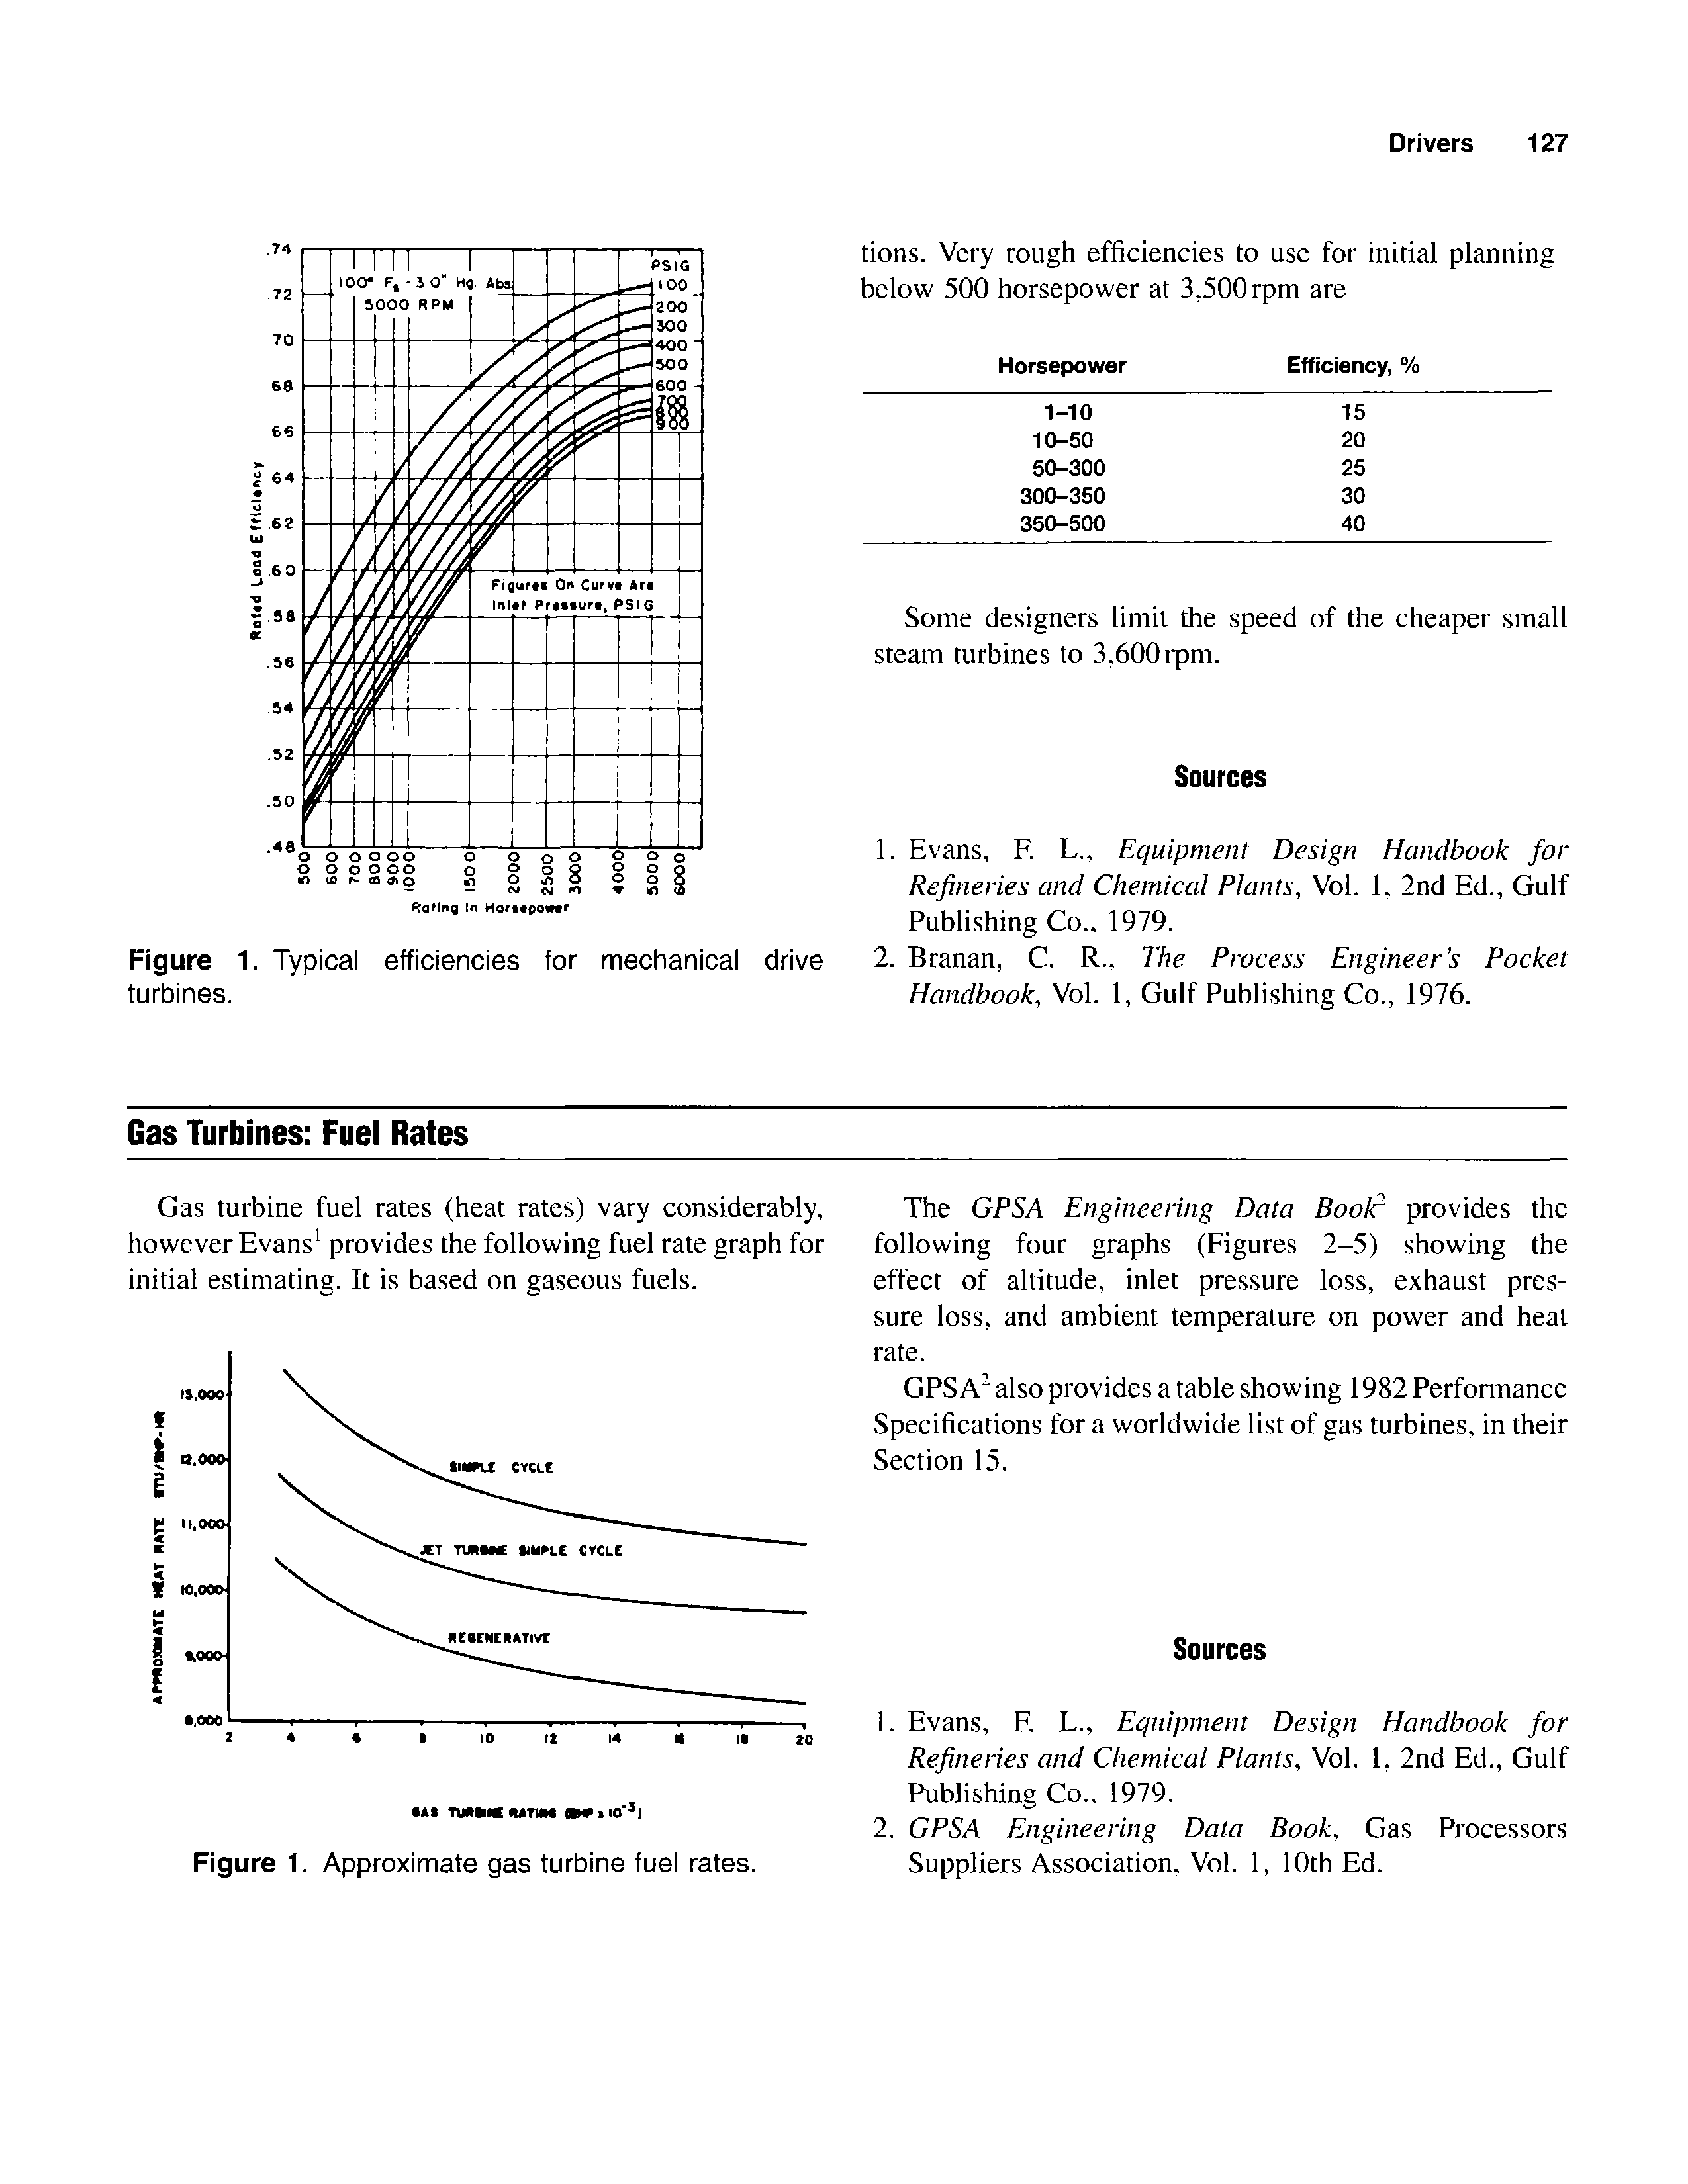 Figure 1. Typical efficiencies for mechanical drive turbines.